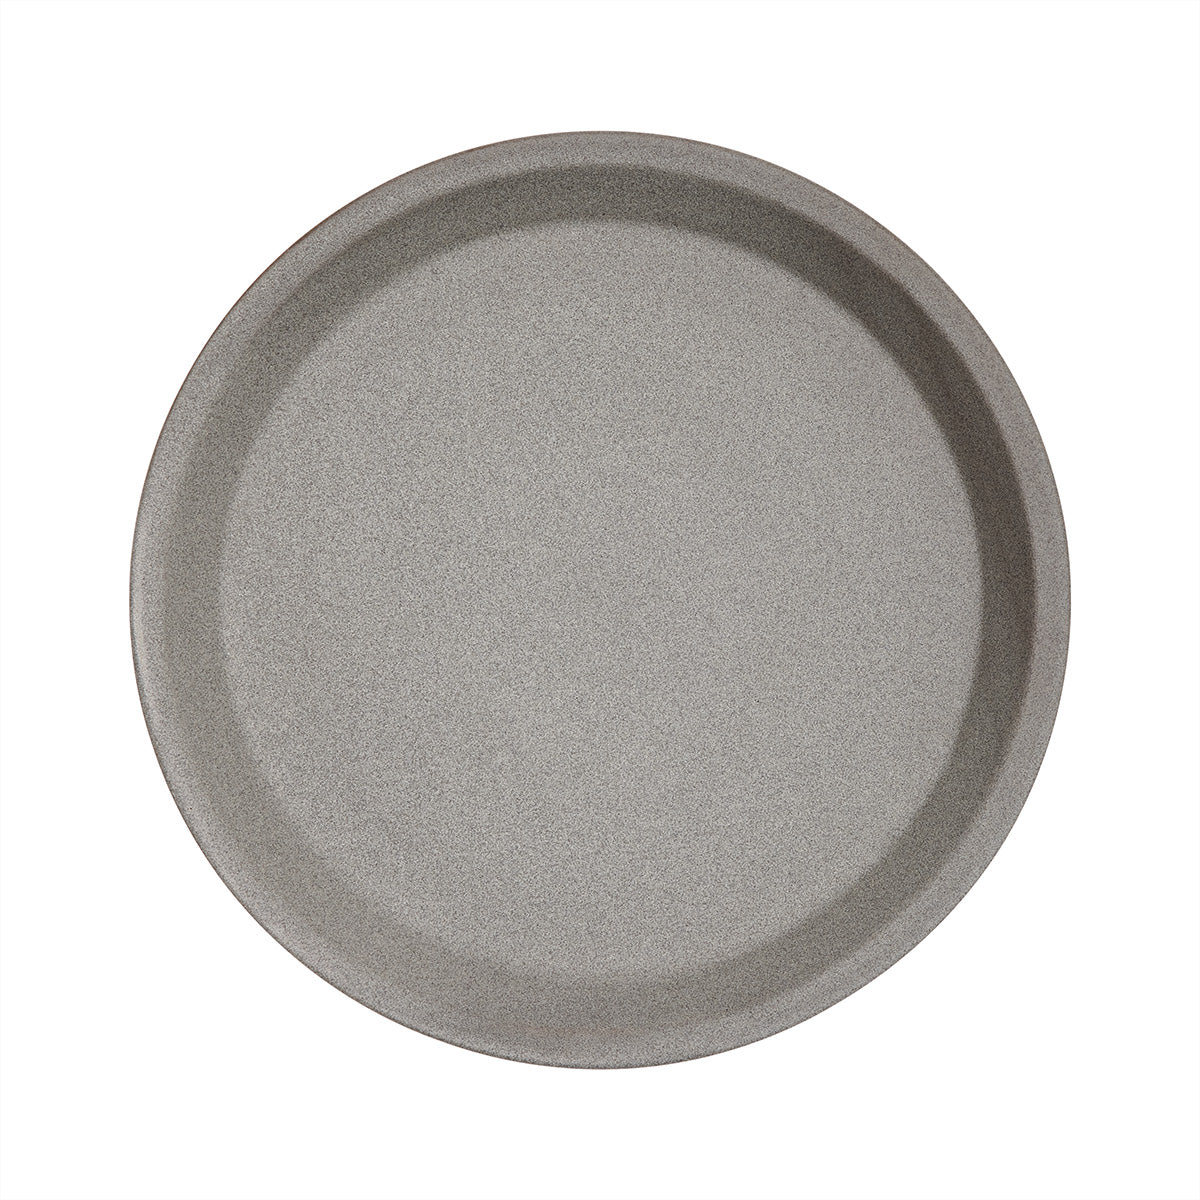 OYOY LIVING Yuka Lunch Plate - Pack of 2 Plate 205 Stone